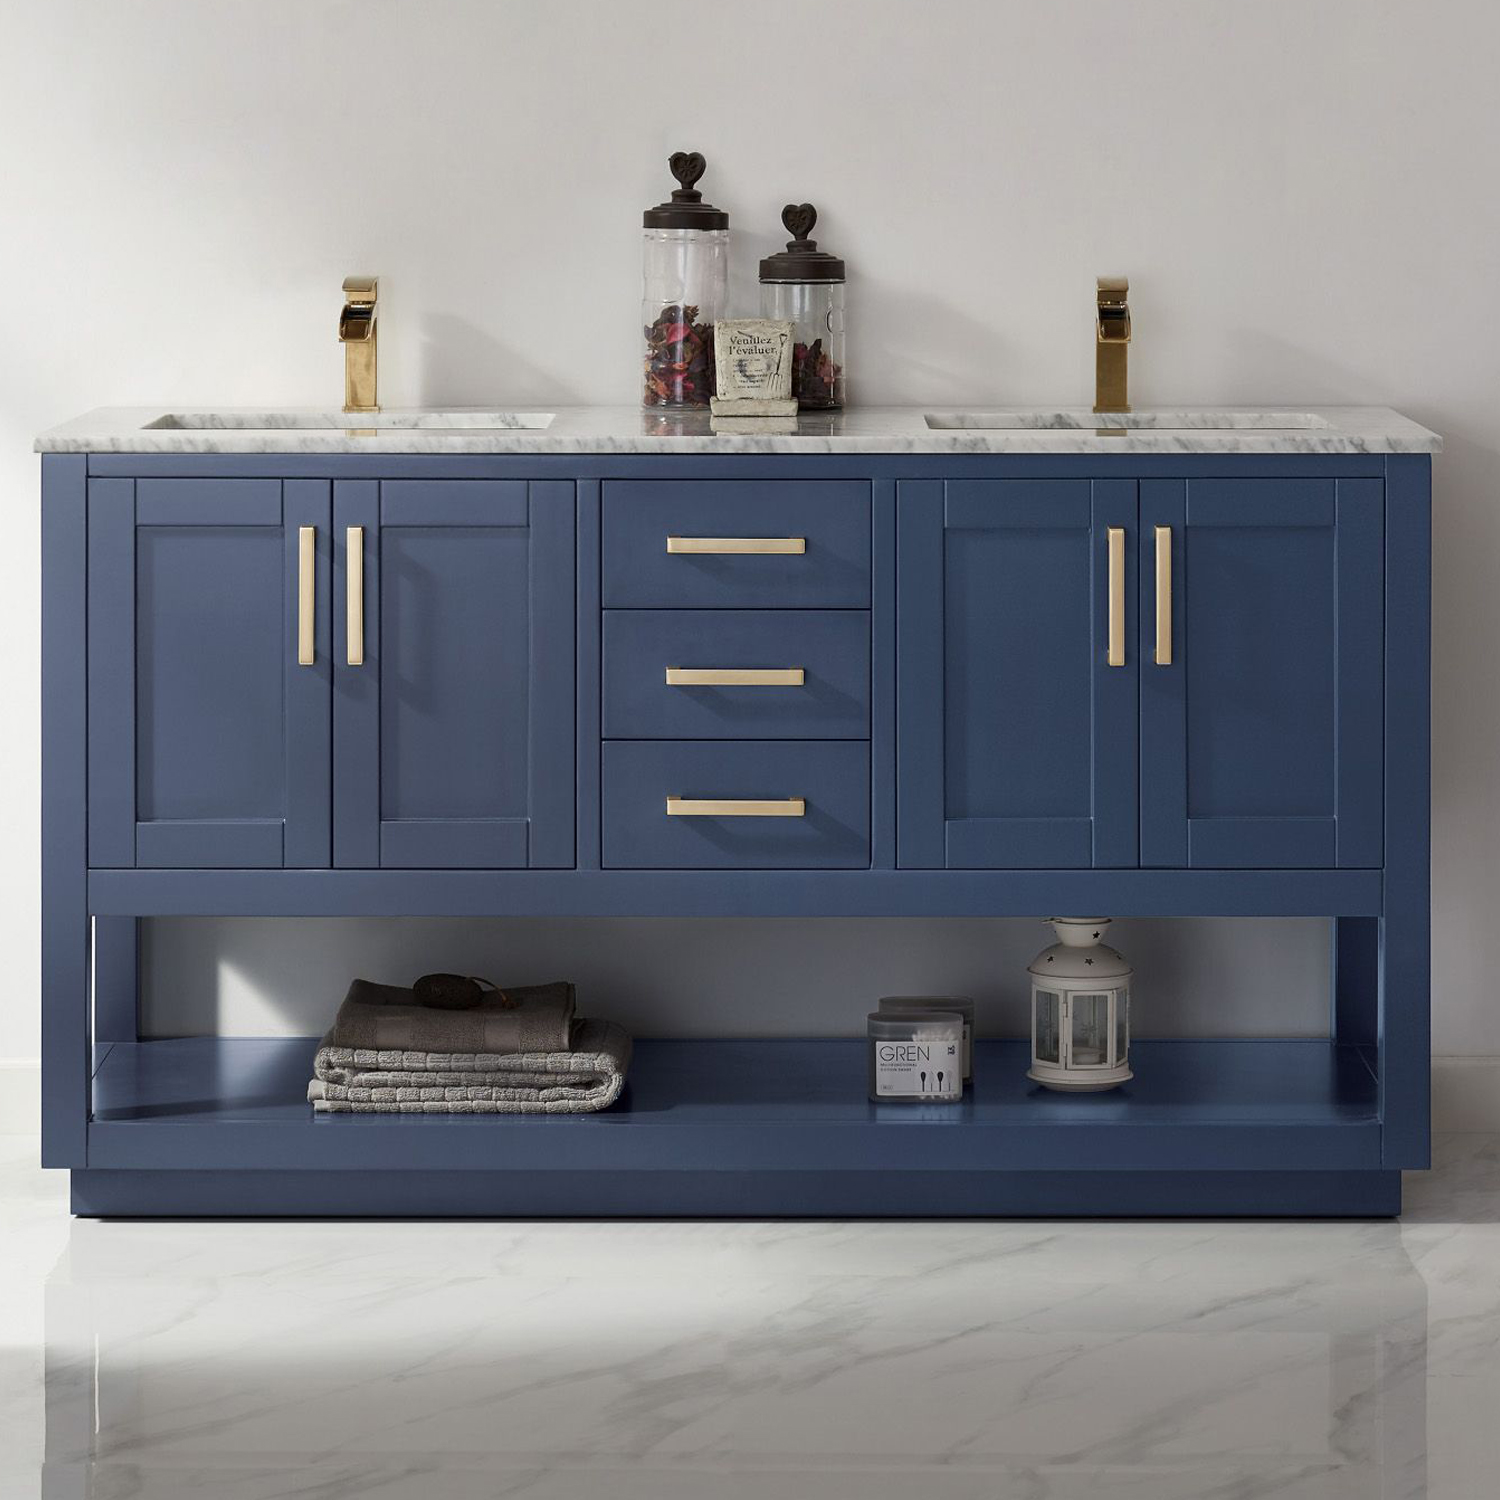 Issac Edwards Collection 60" Double Bathroom Vanity Set in RoyalBlue and Carrara White Marble Countertop with Mirror Option